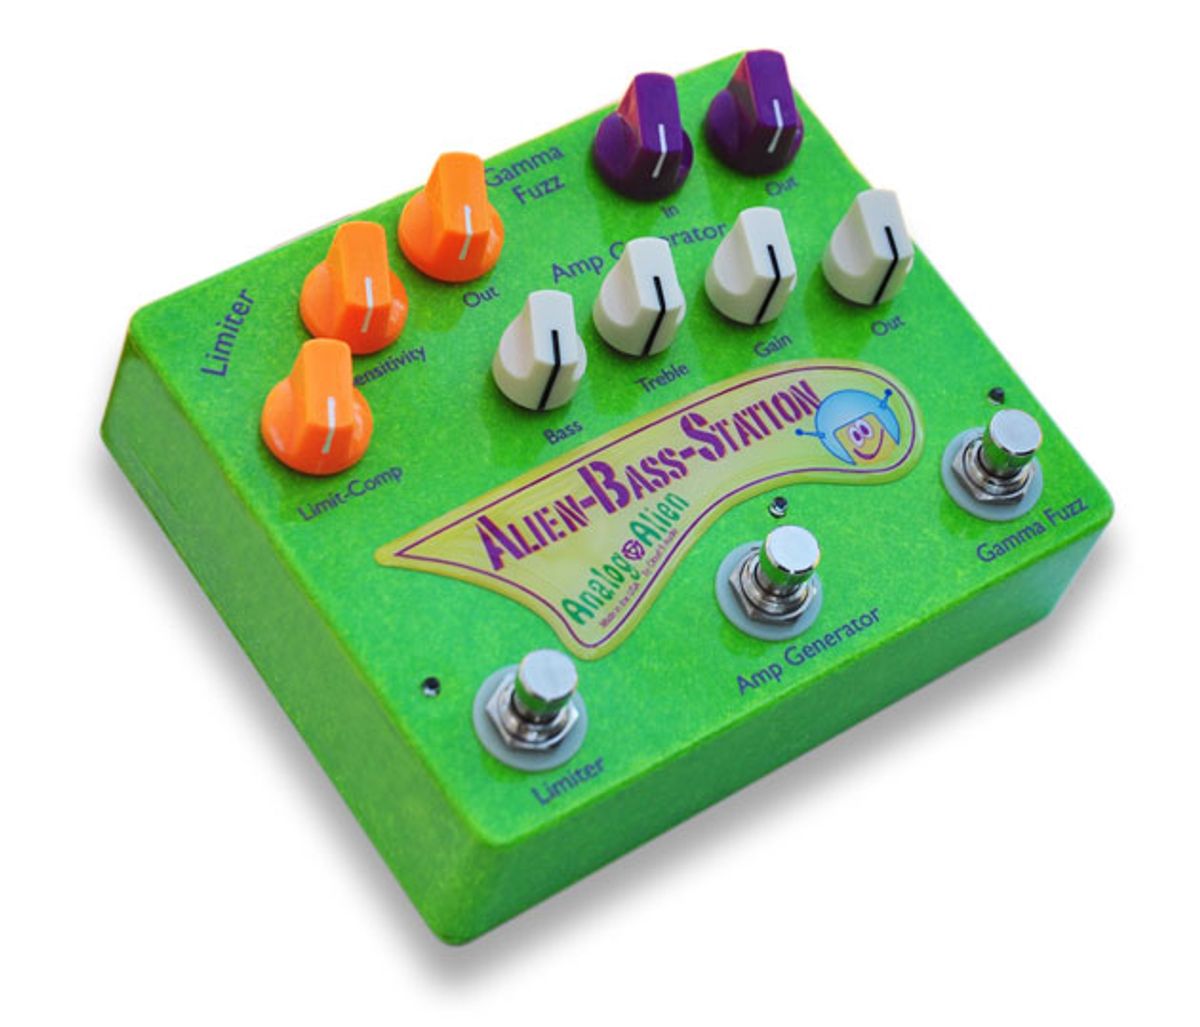 Analog Alien Introduces the Alien Bass Station